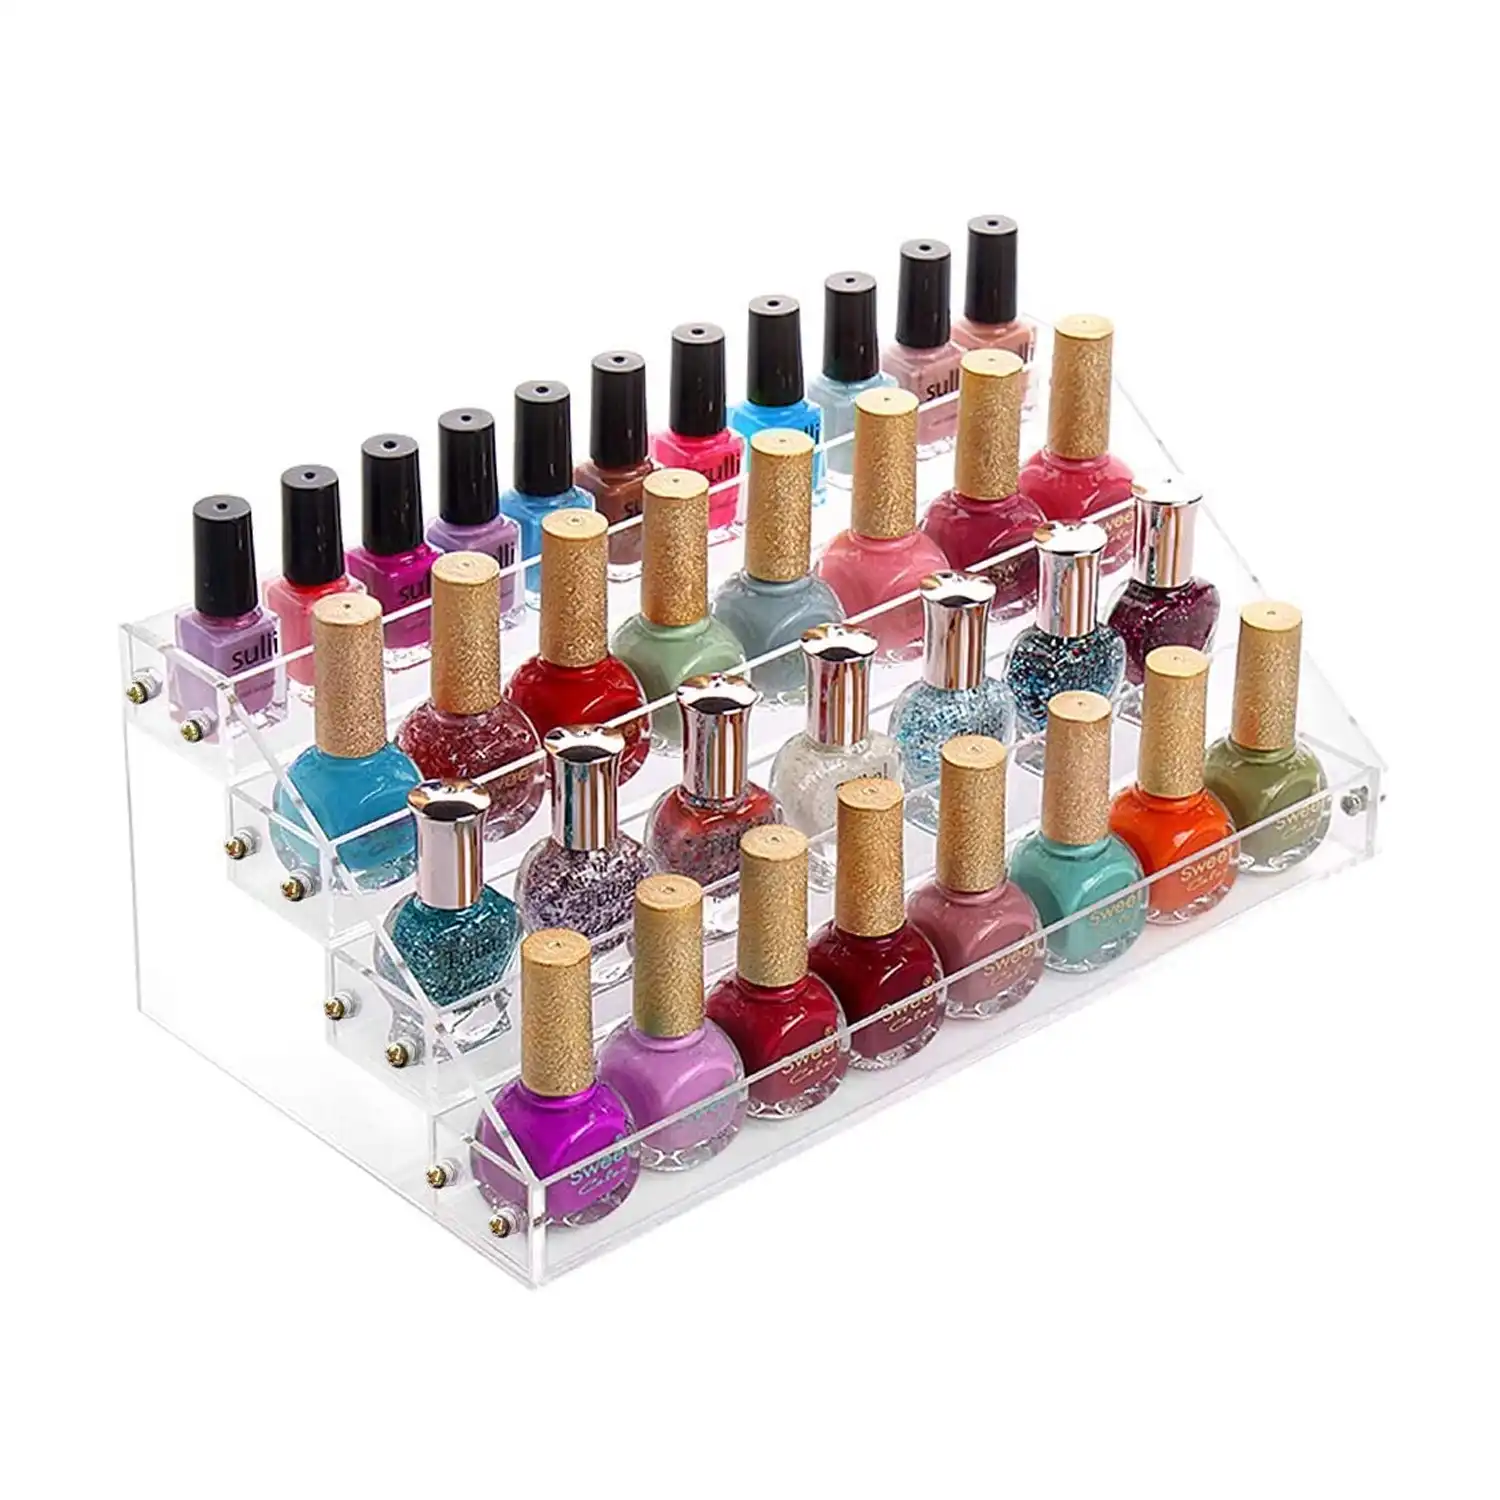 Acrylic Makeup Organizer Container 5mm 4 Tier Clear Acrylic Cosmetic Nail Polish Stand